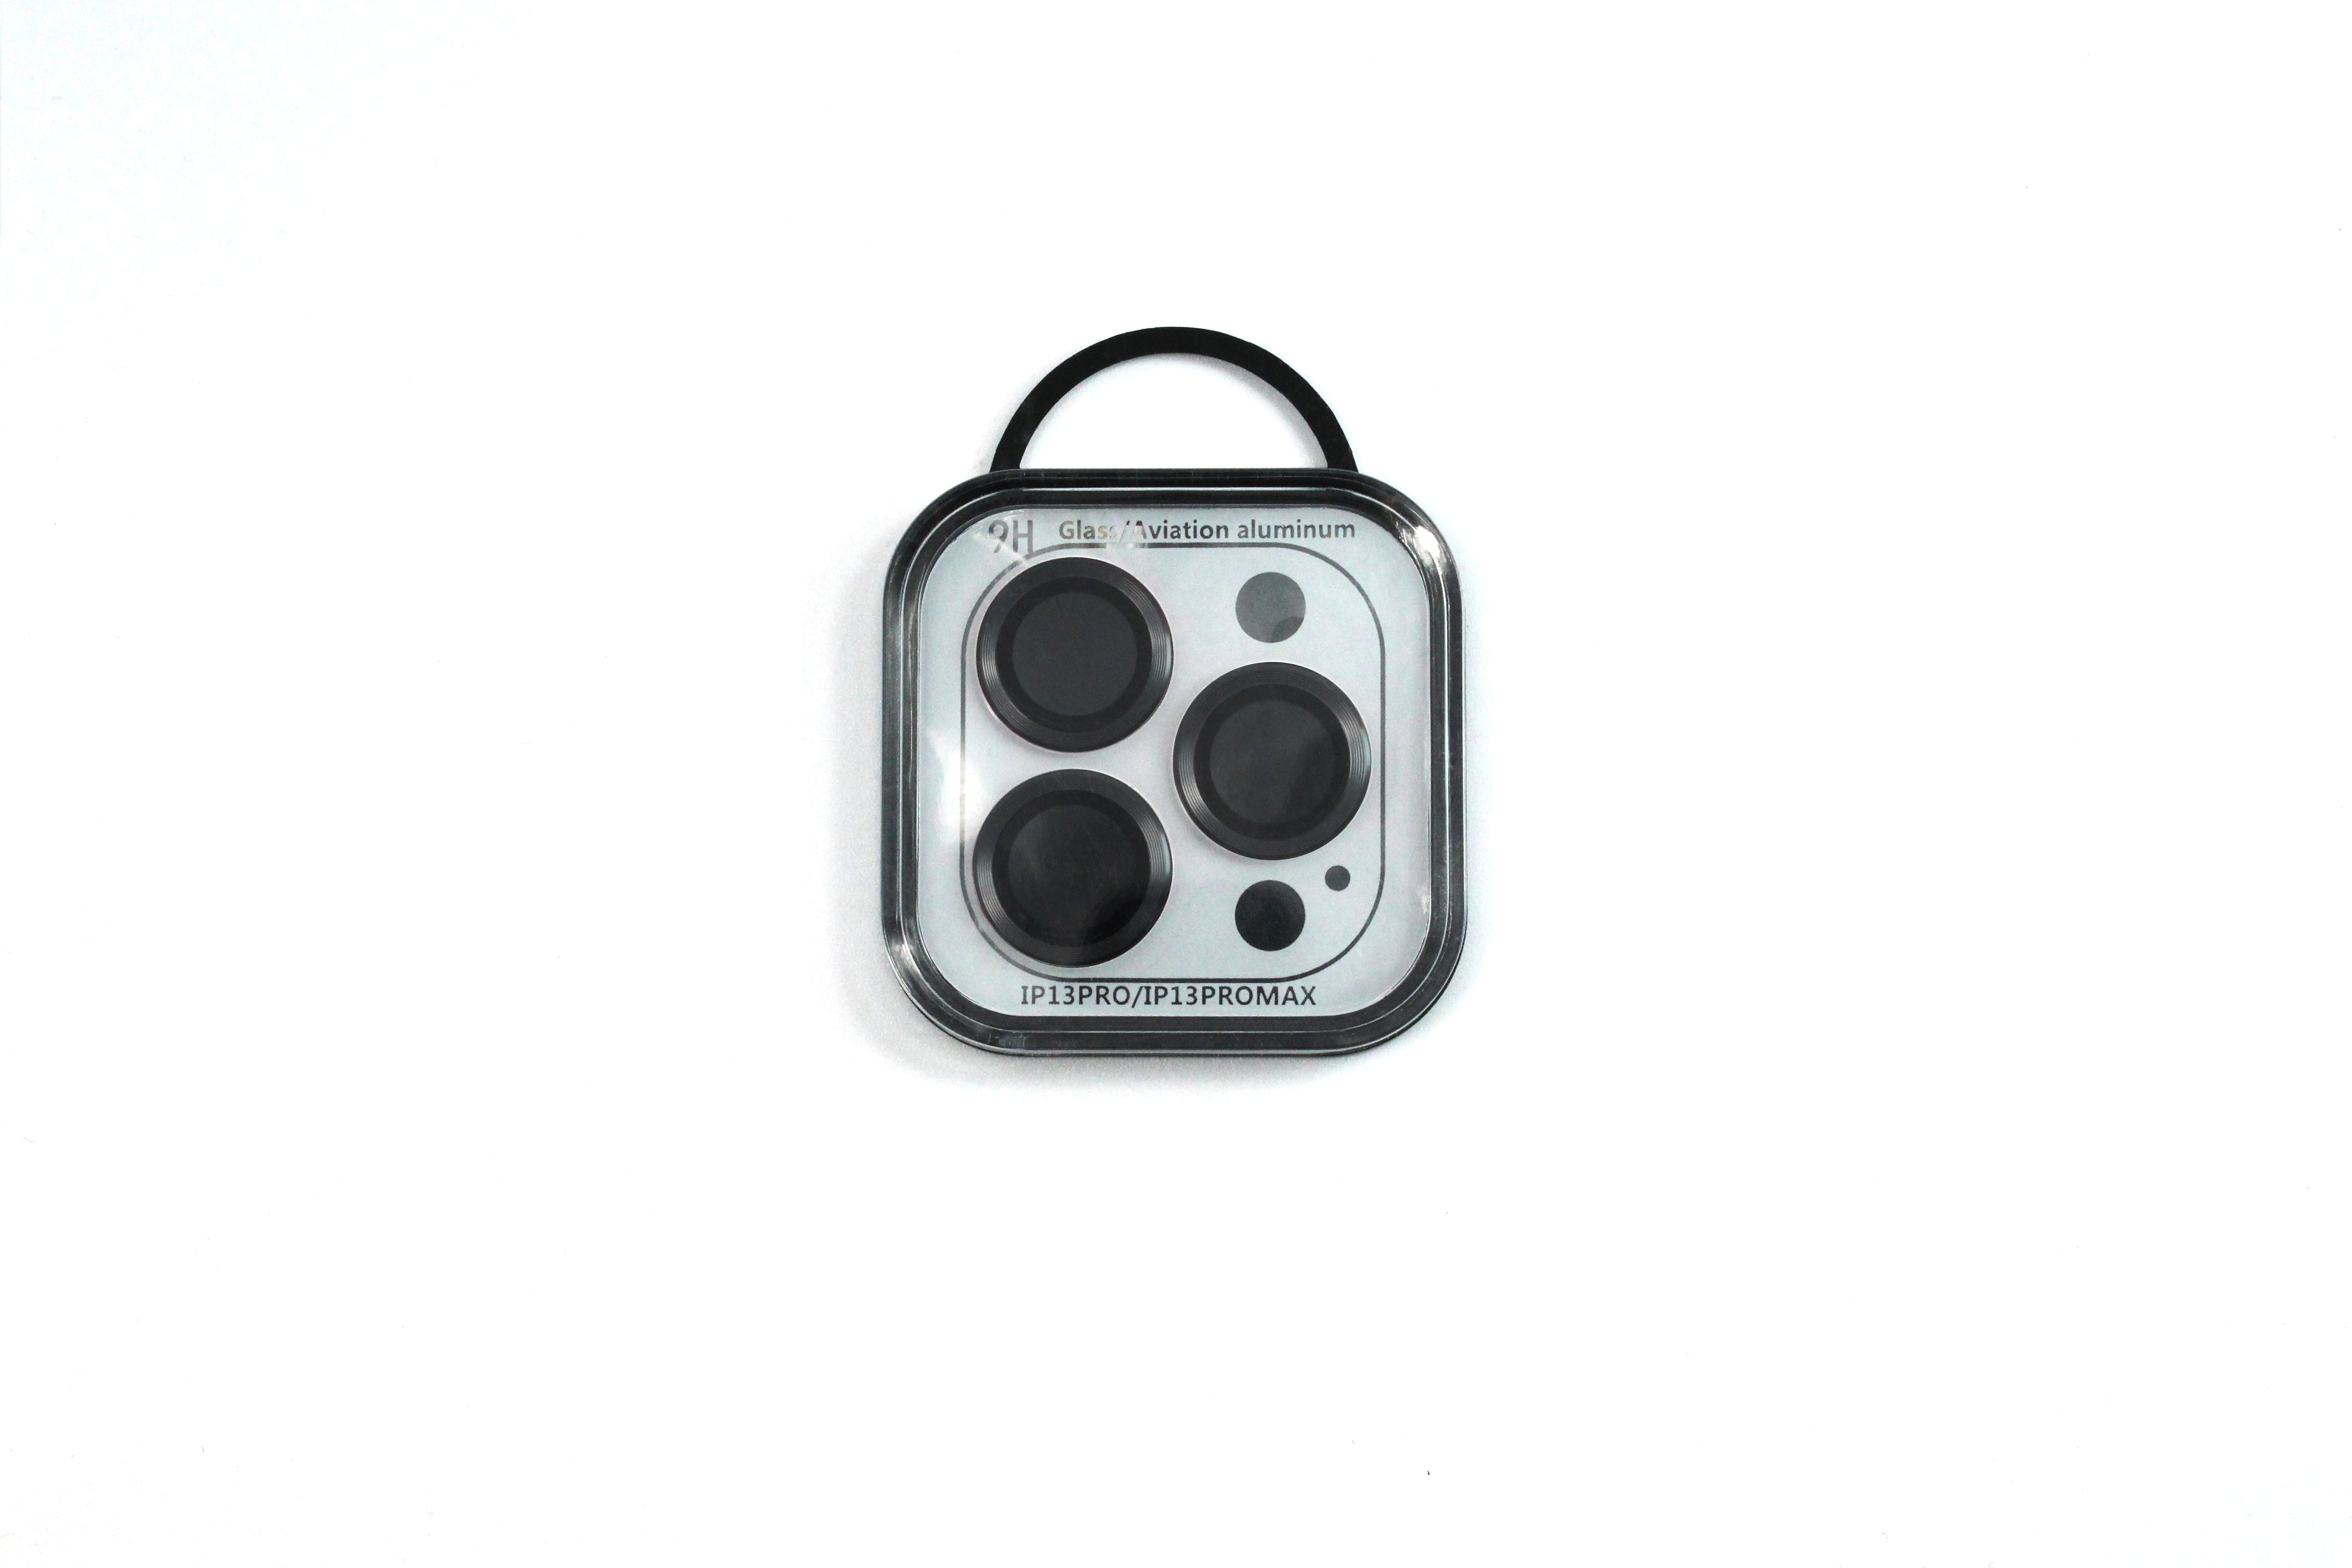 iPhone 13 Pro/Pro Max Camera Lens Covers